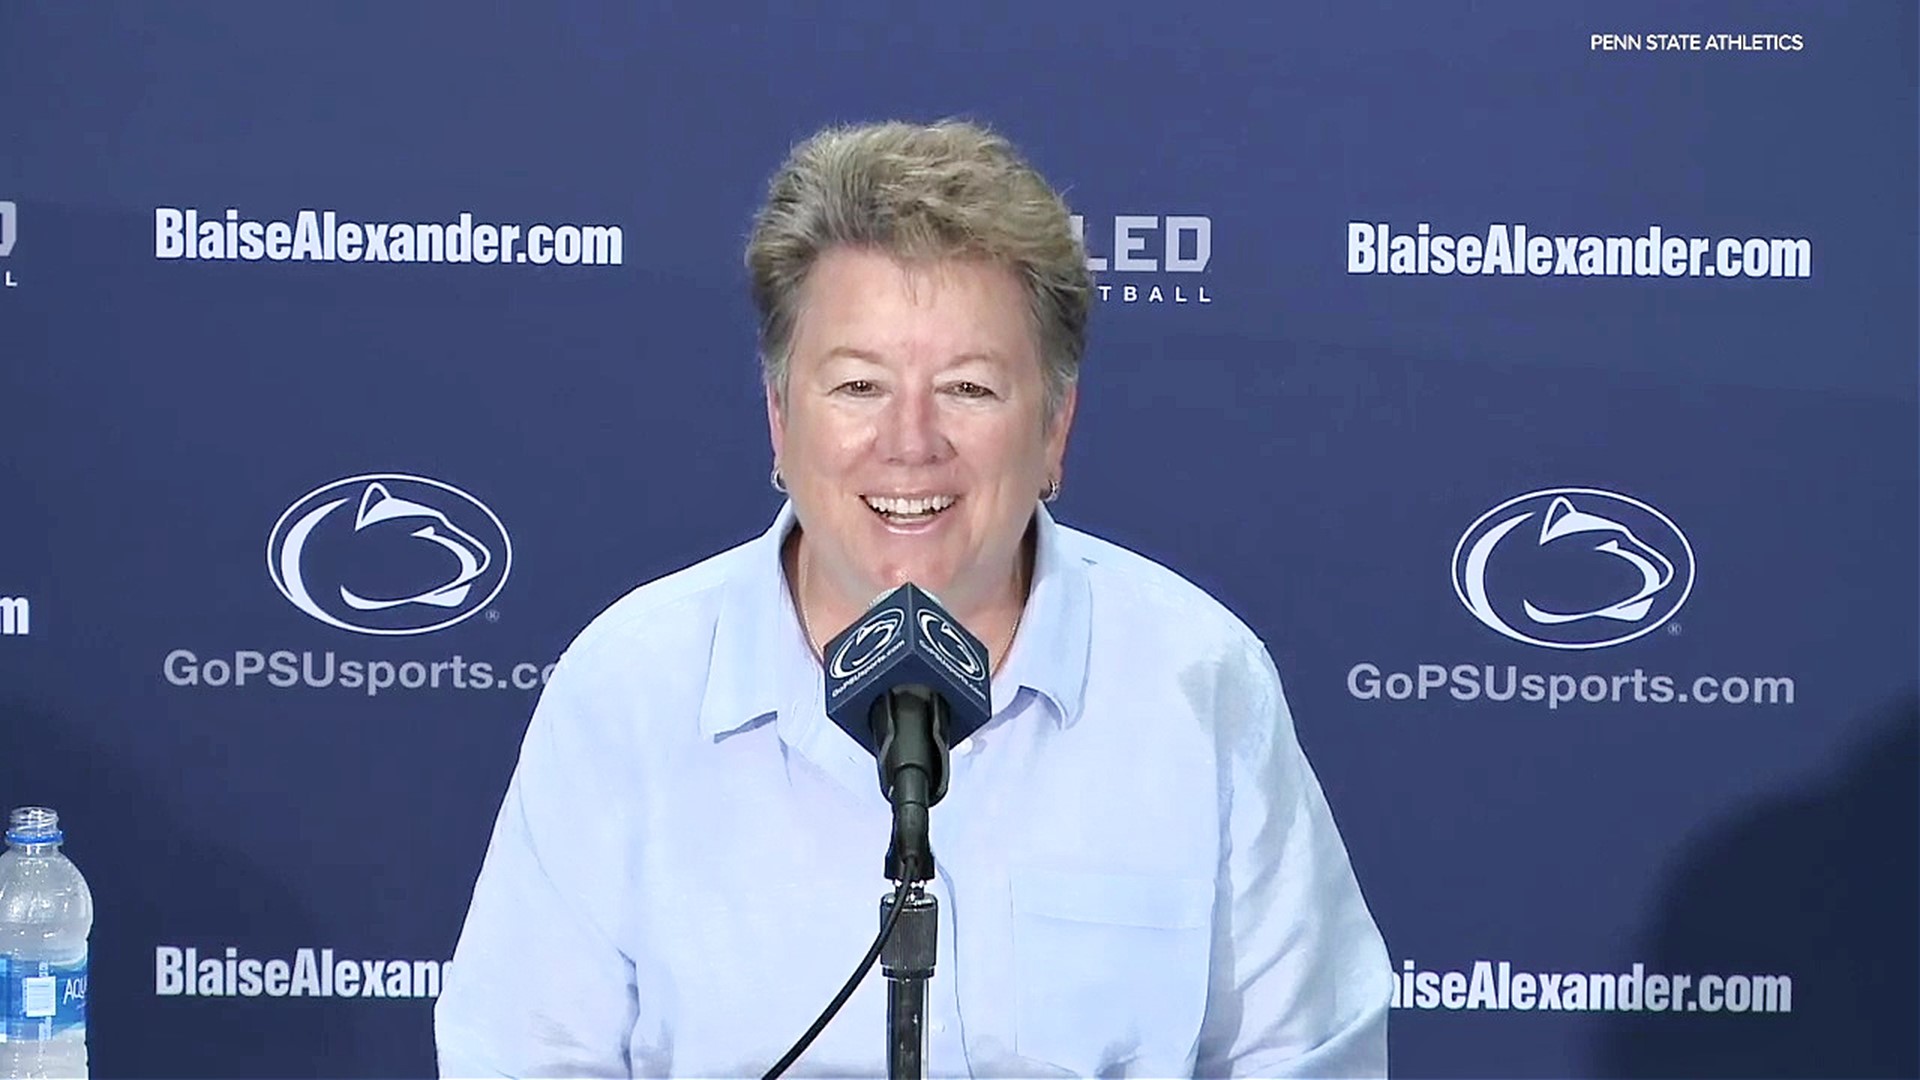 Sandy Barbour, vice president for Intercollegiate Athletics at PSU, has led the athletic department since 2014.